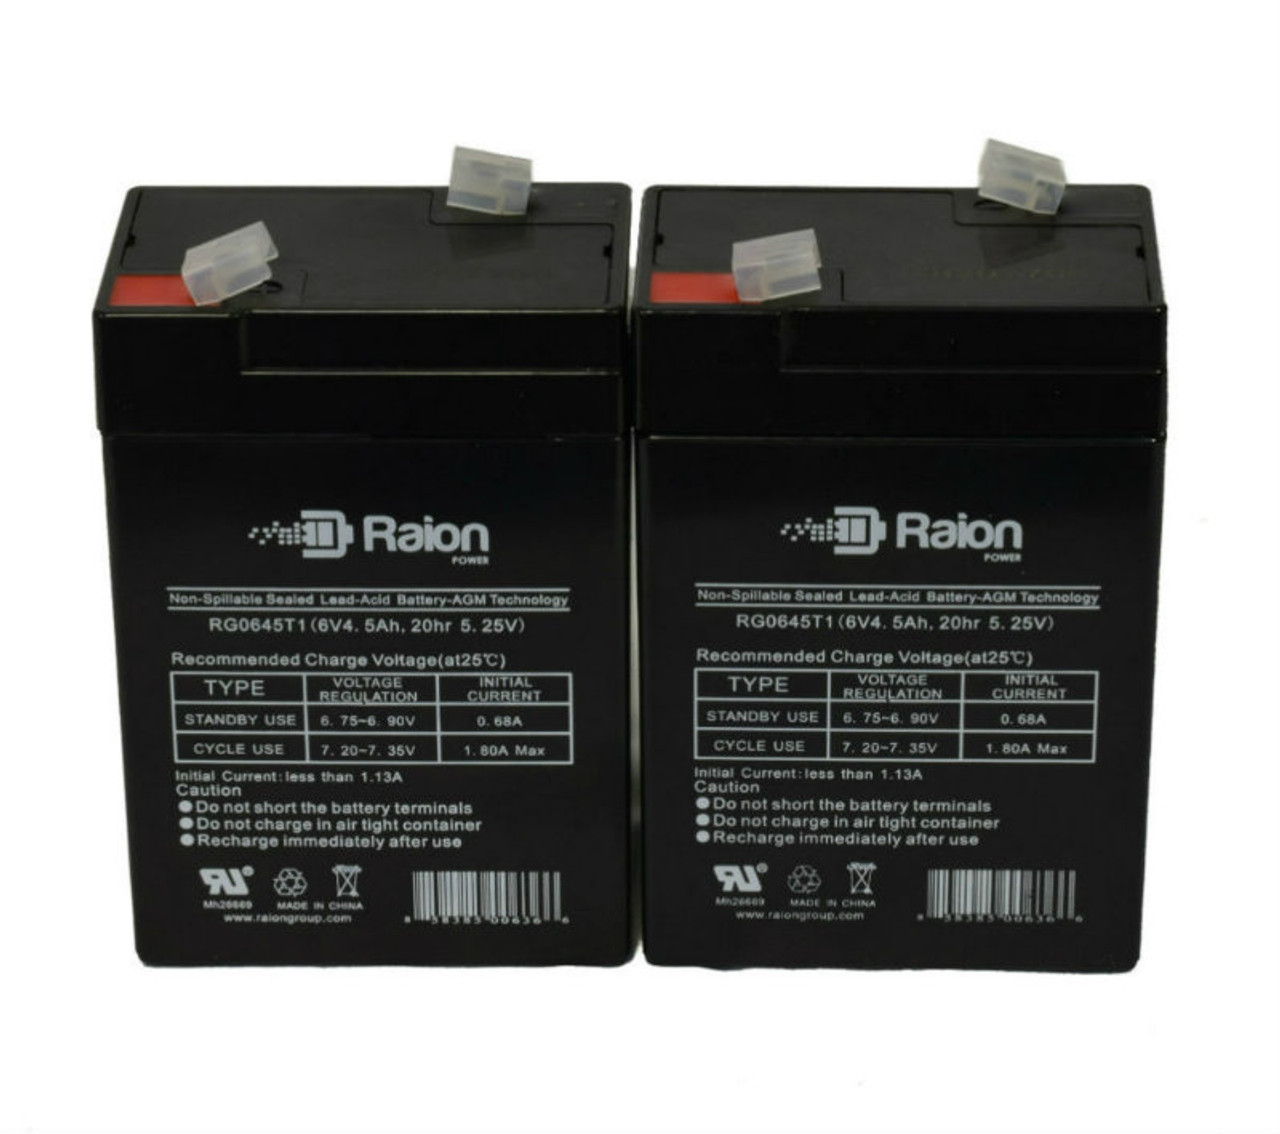 Raion Power 6V 4.5Ah Replacement Emergency Light Battery for Dyna-Ray S18210 - 2 Pack